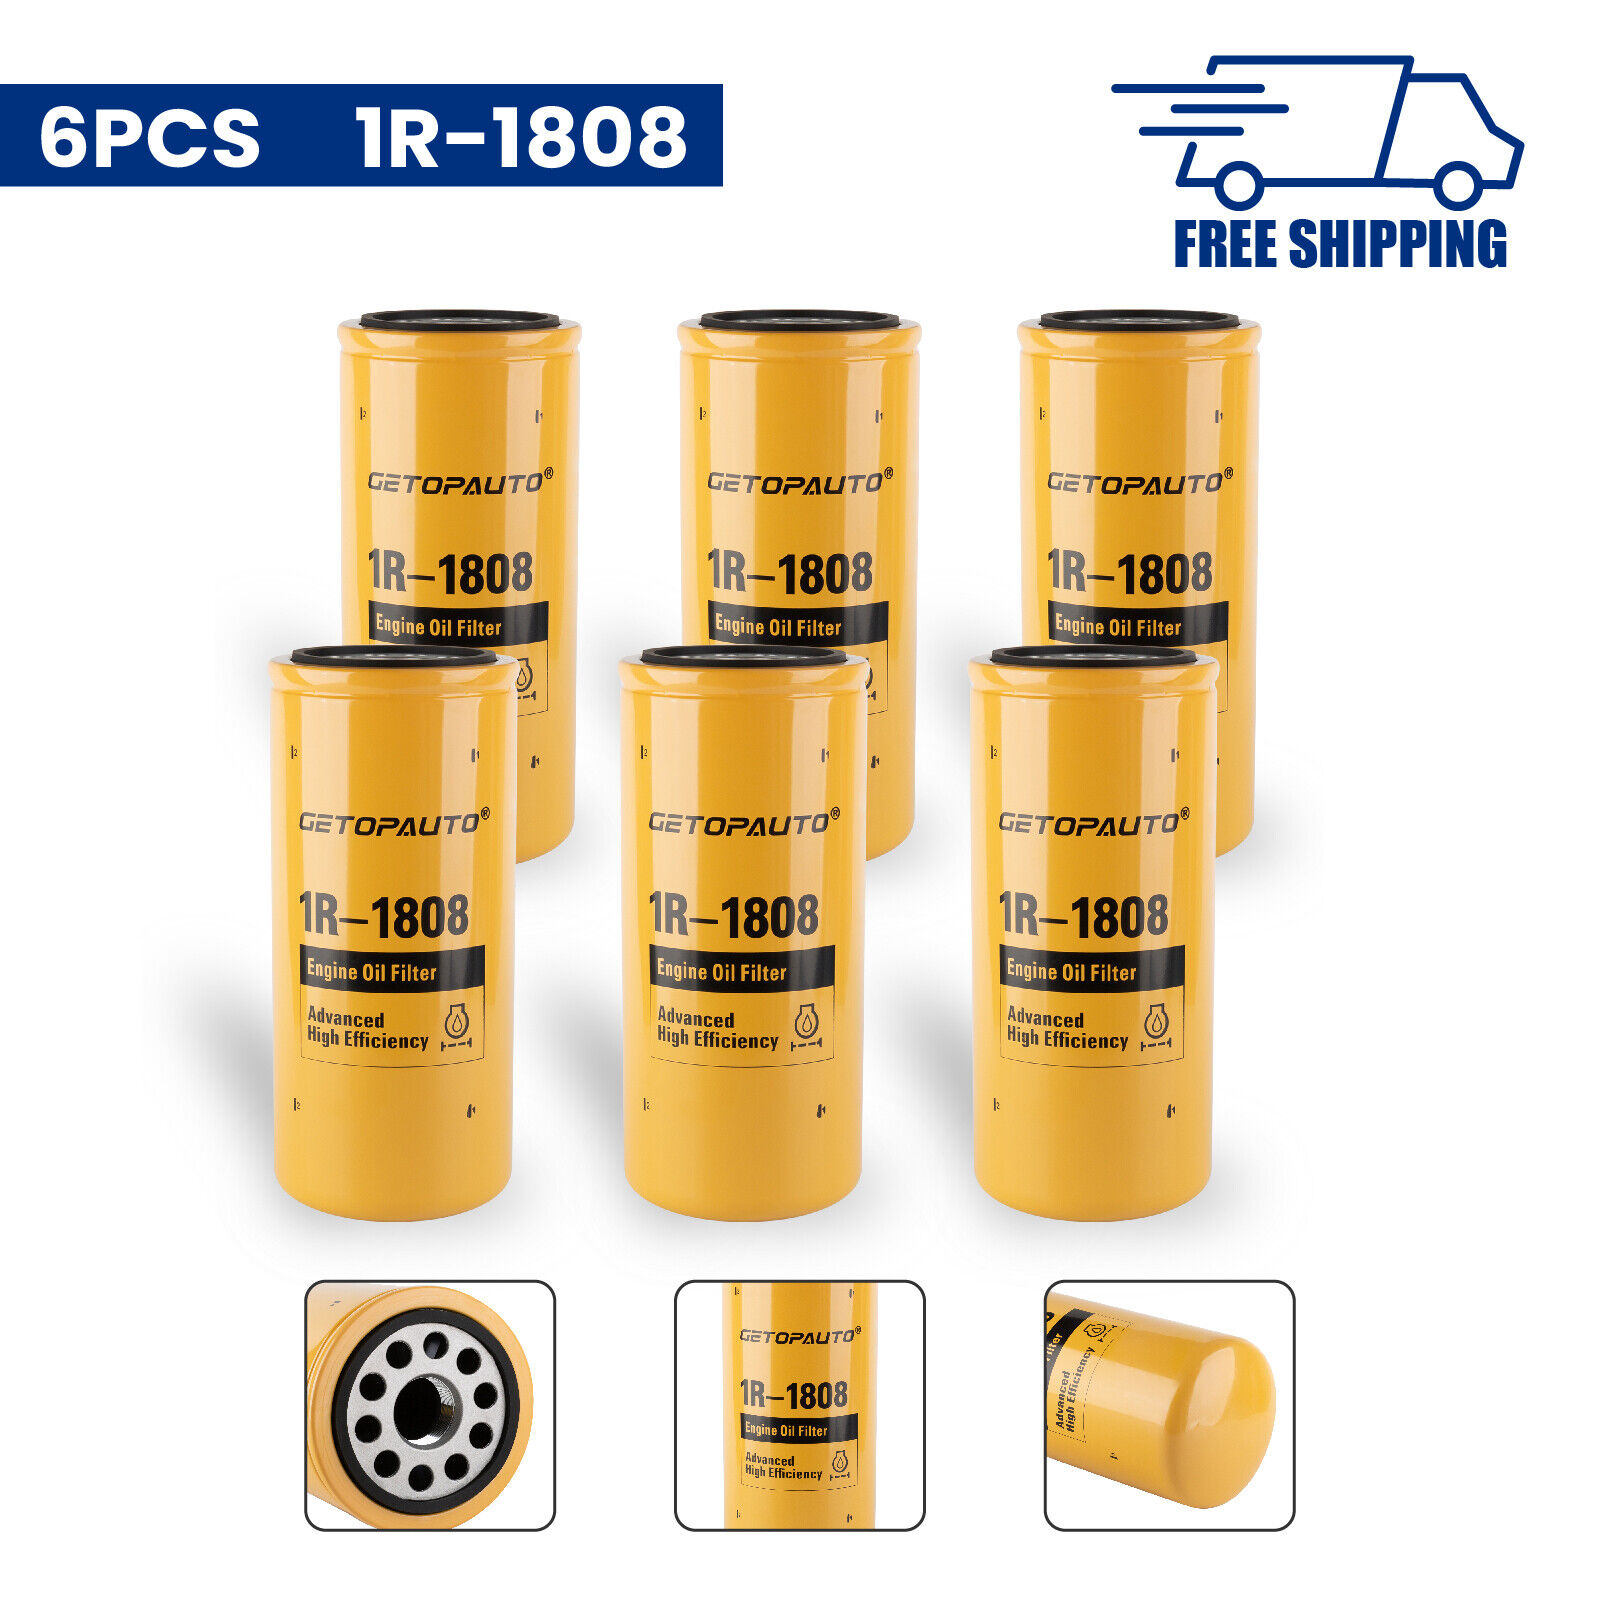 1R-1808 Engine Oil Filter For Caterpillar Replace 275-2604 P551808 6 PCS